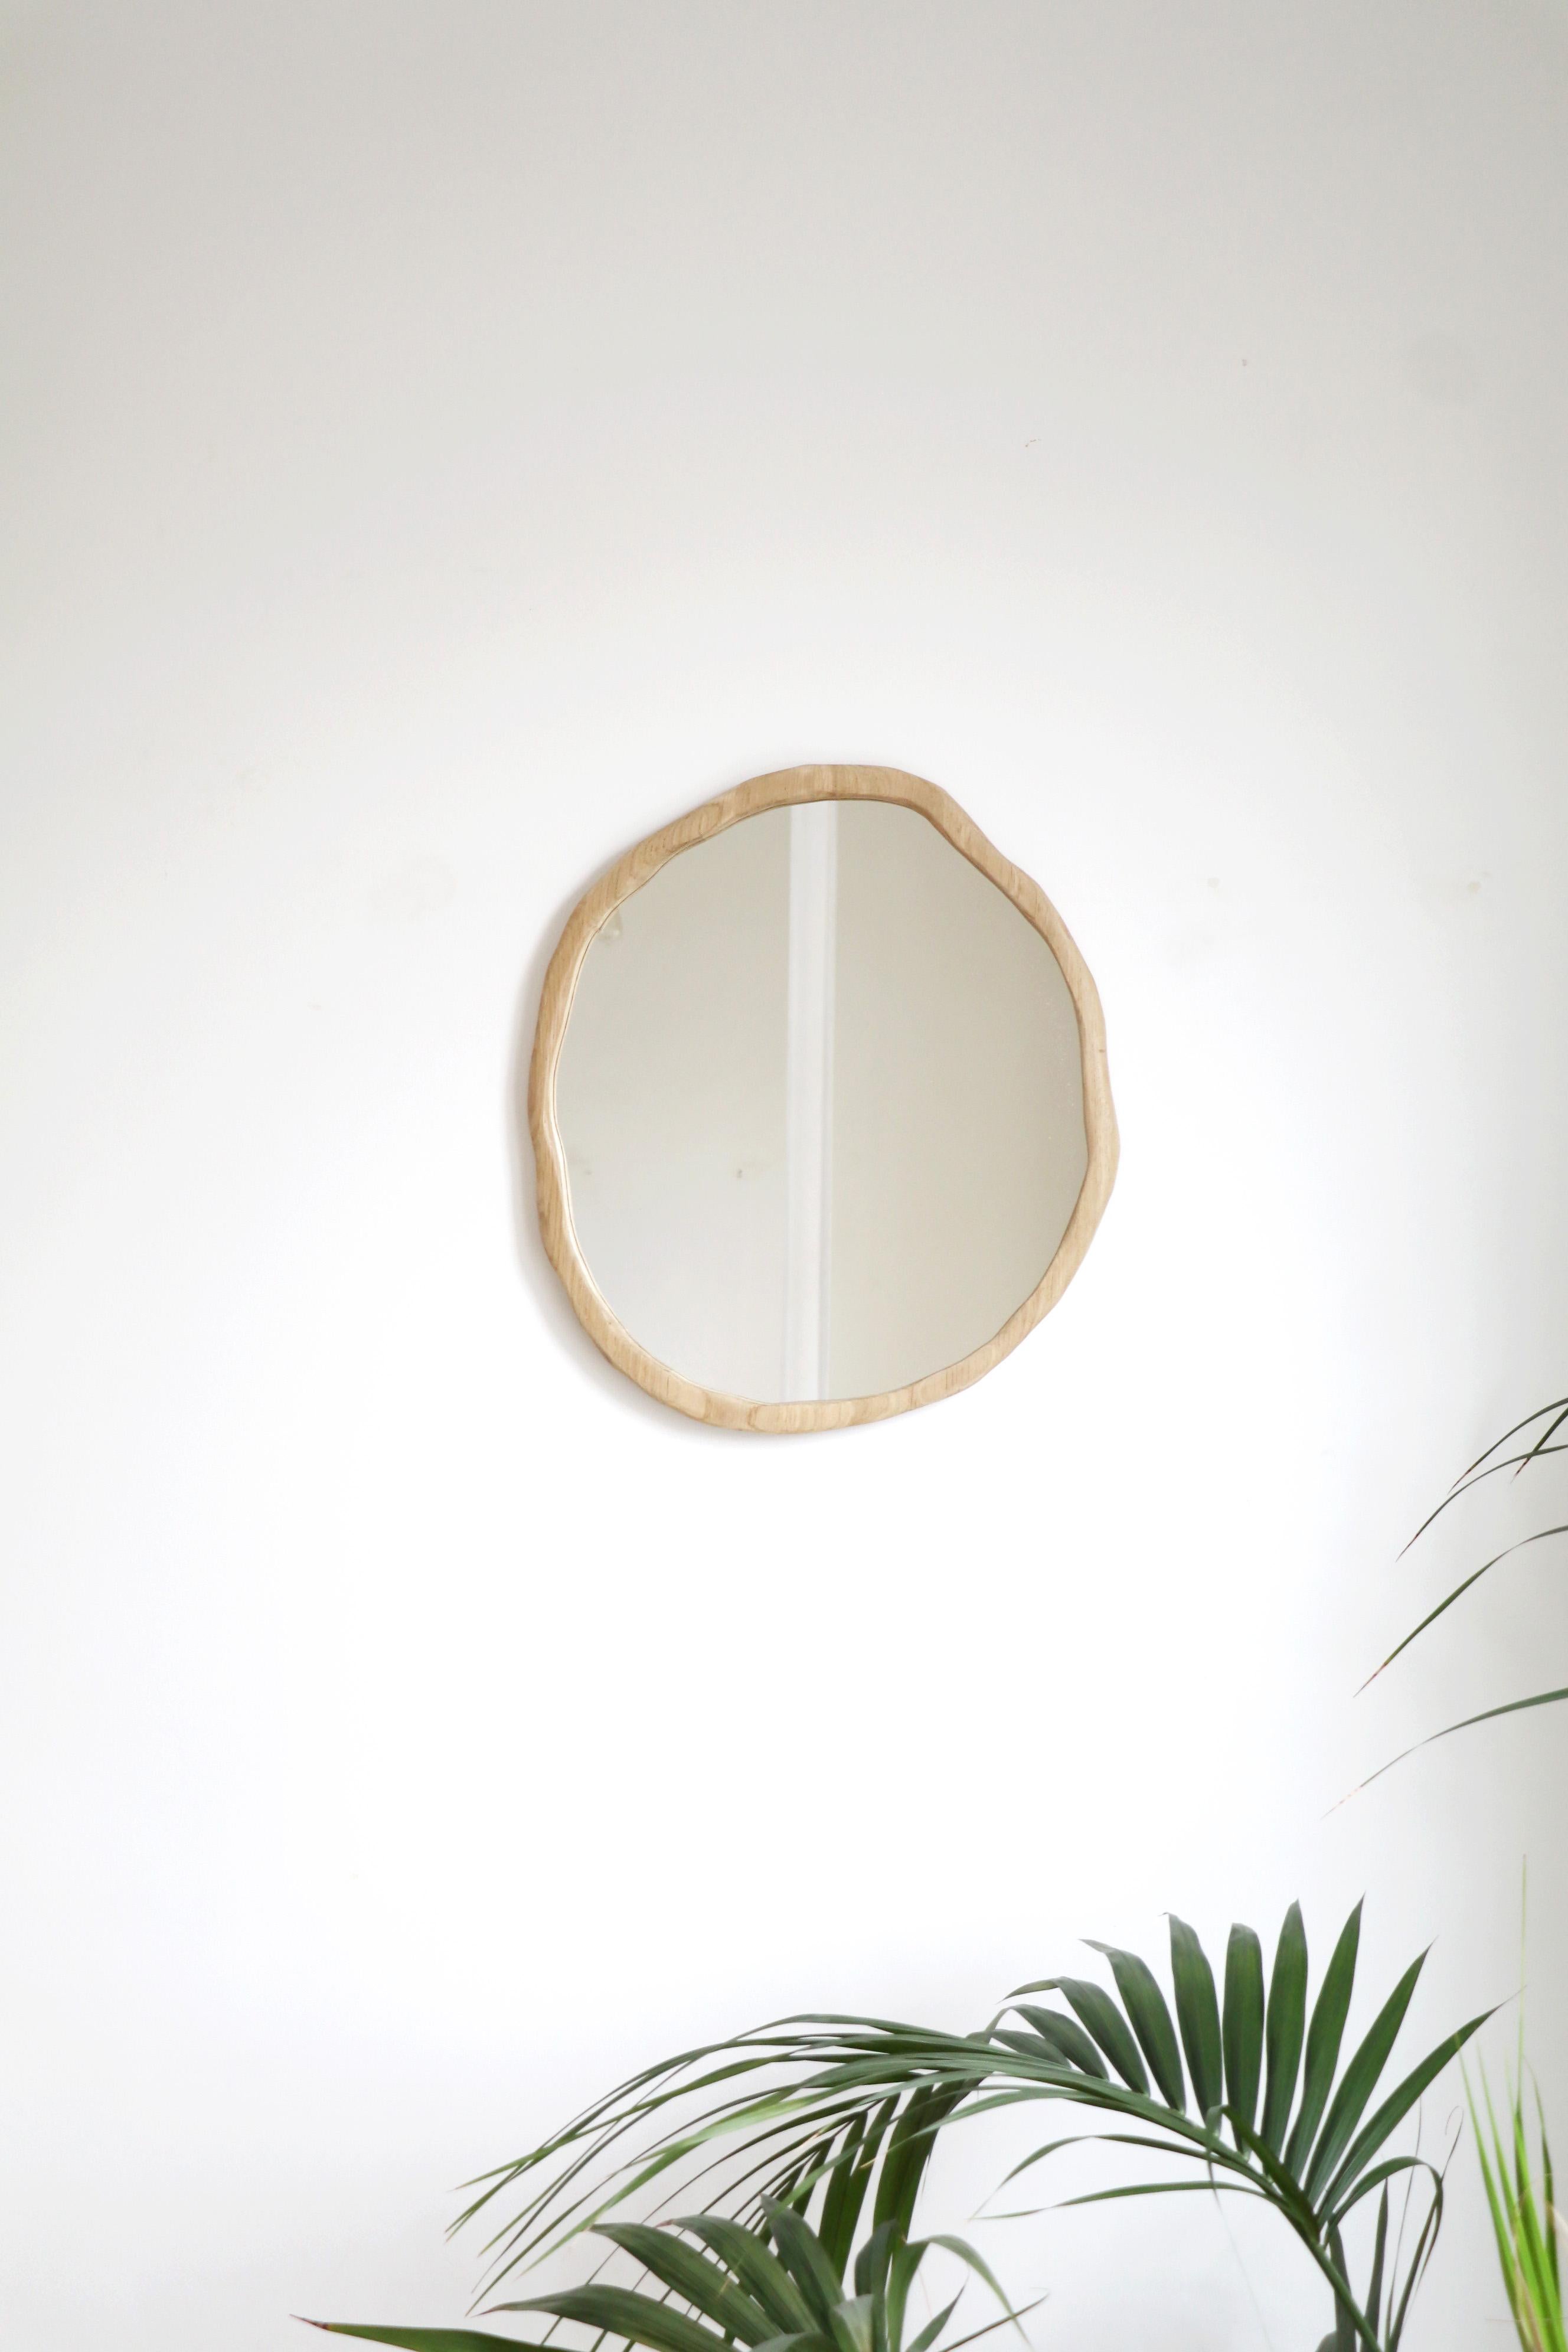 Hand-Crafted Small Ondulation Mirror by Alice Lahana Studio For Sale